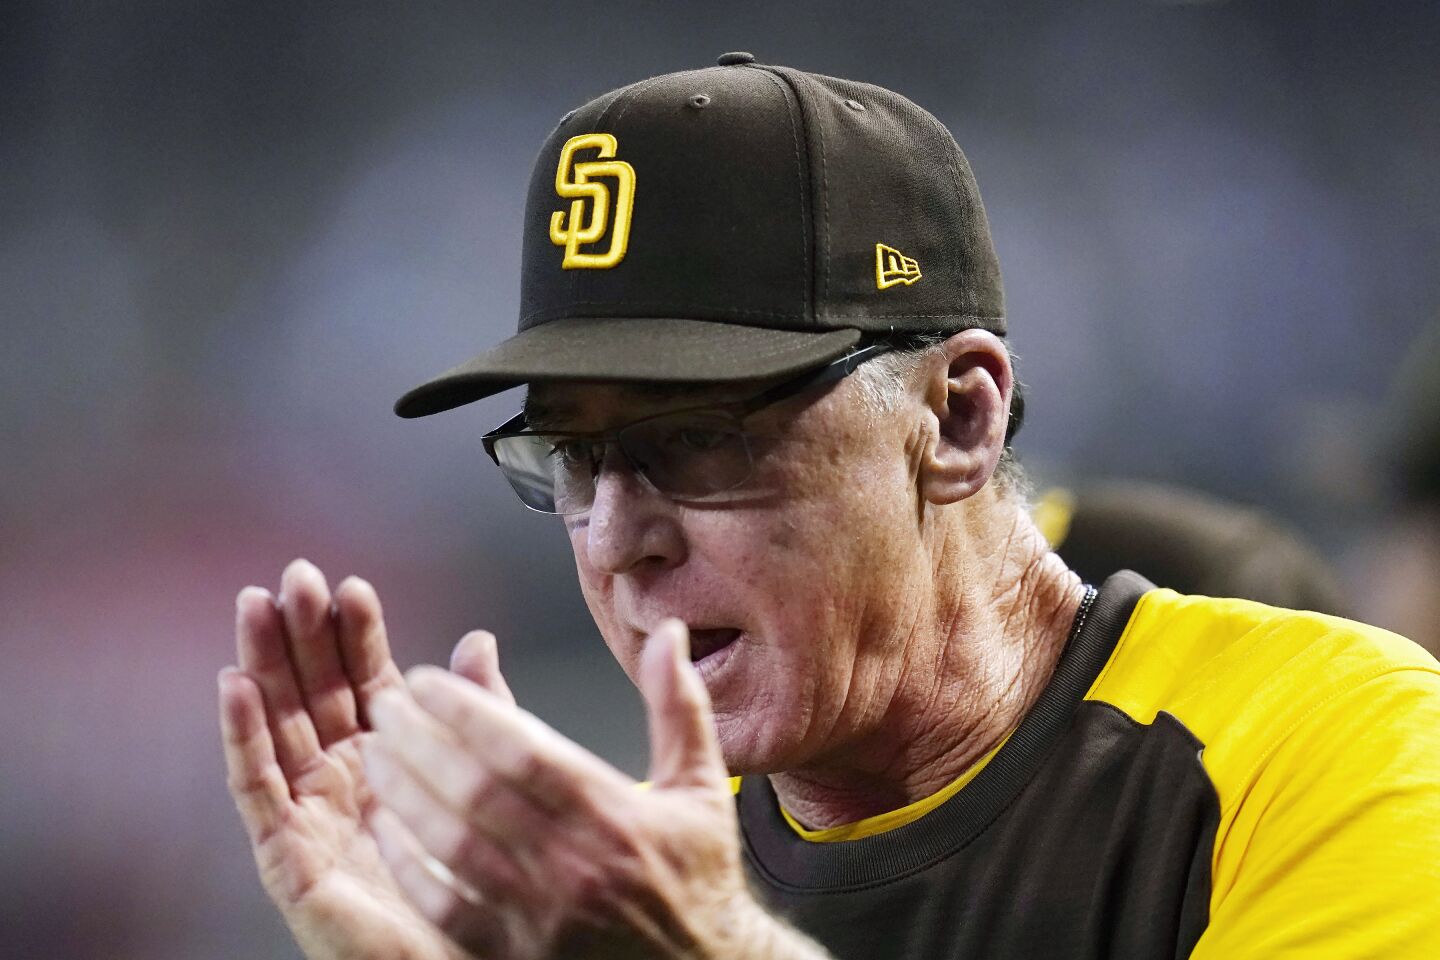 Game 3: Padres TBAPadres manager Bob Melvin also has not announced his starter for the last game, but RHP Yu Darvish will be on regular rest and the Padres had been skipping LHP Sean Manaea when off-days allowed them to keep their top four starters on regular rest.